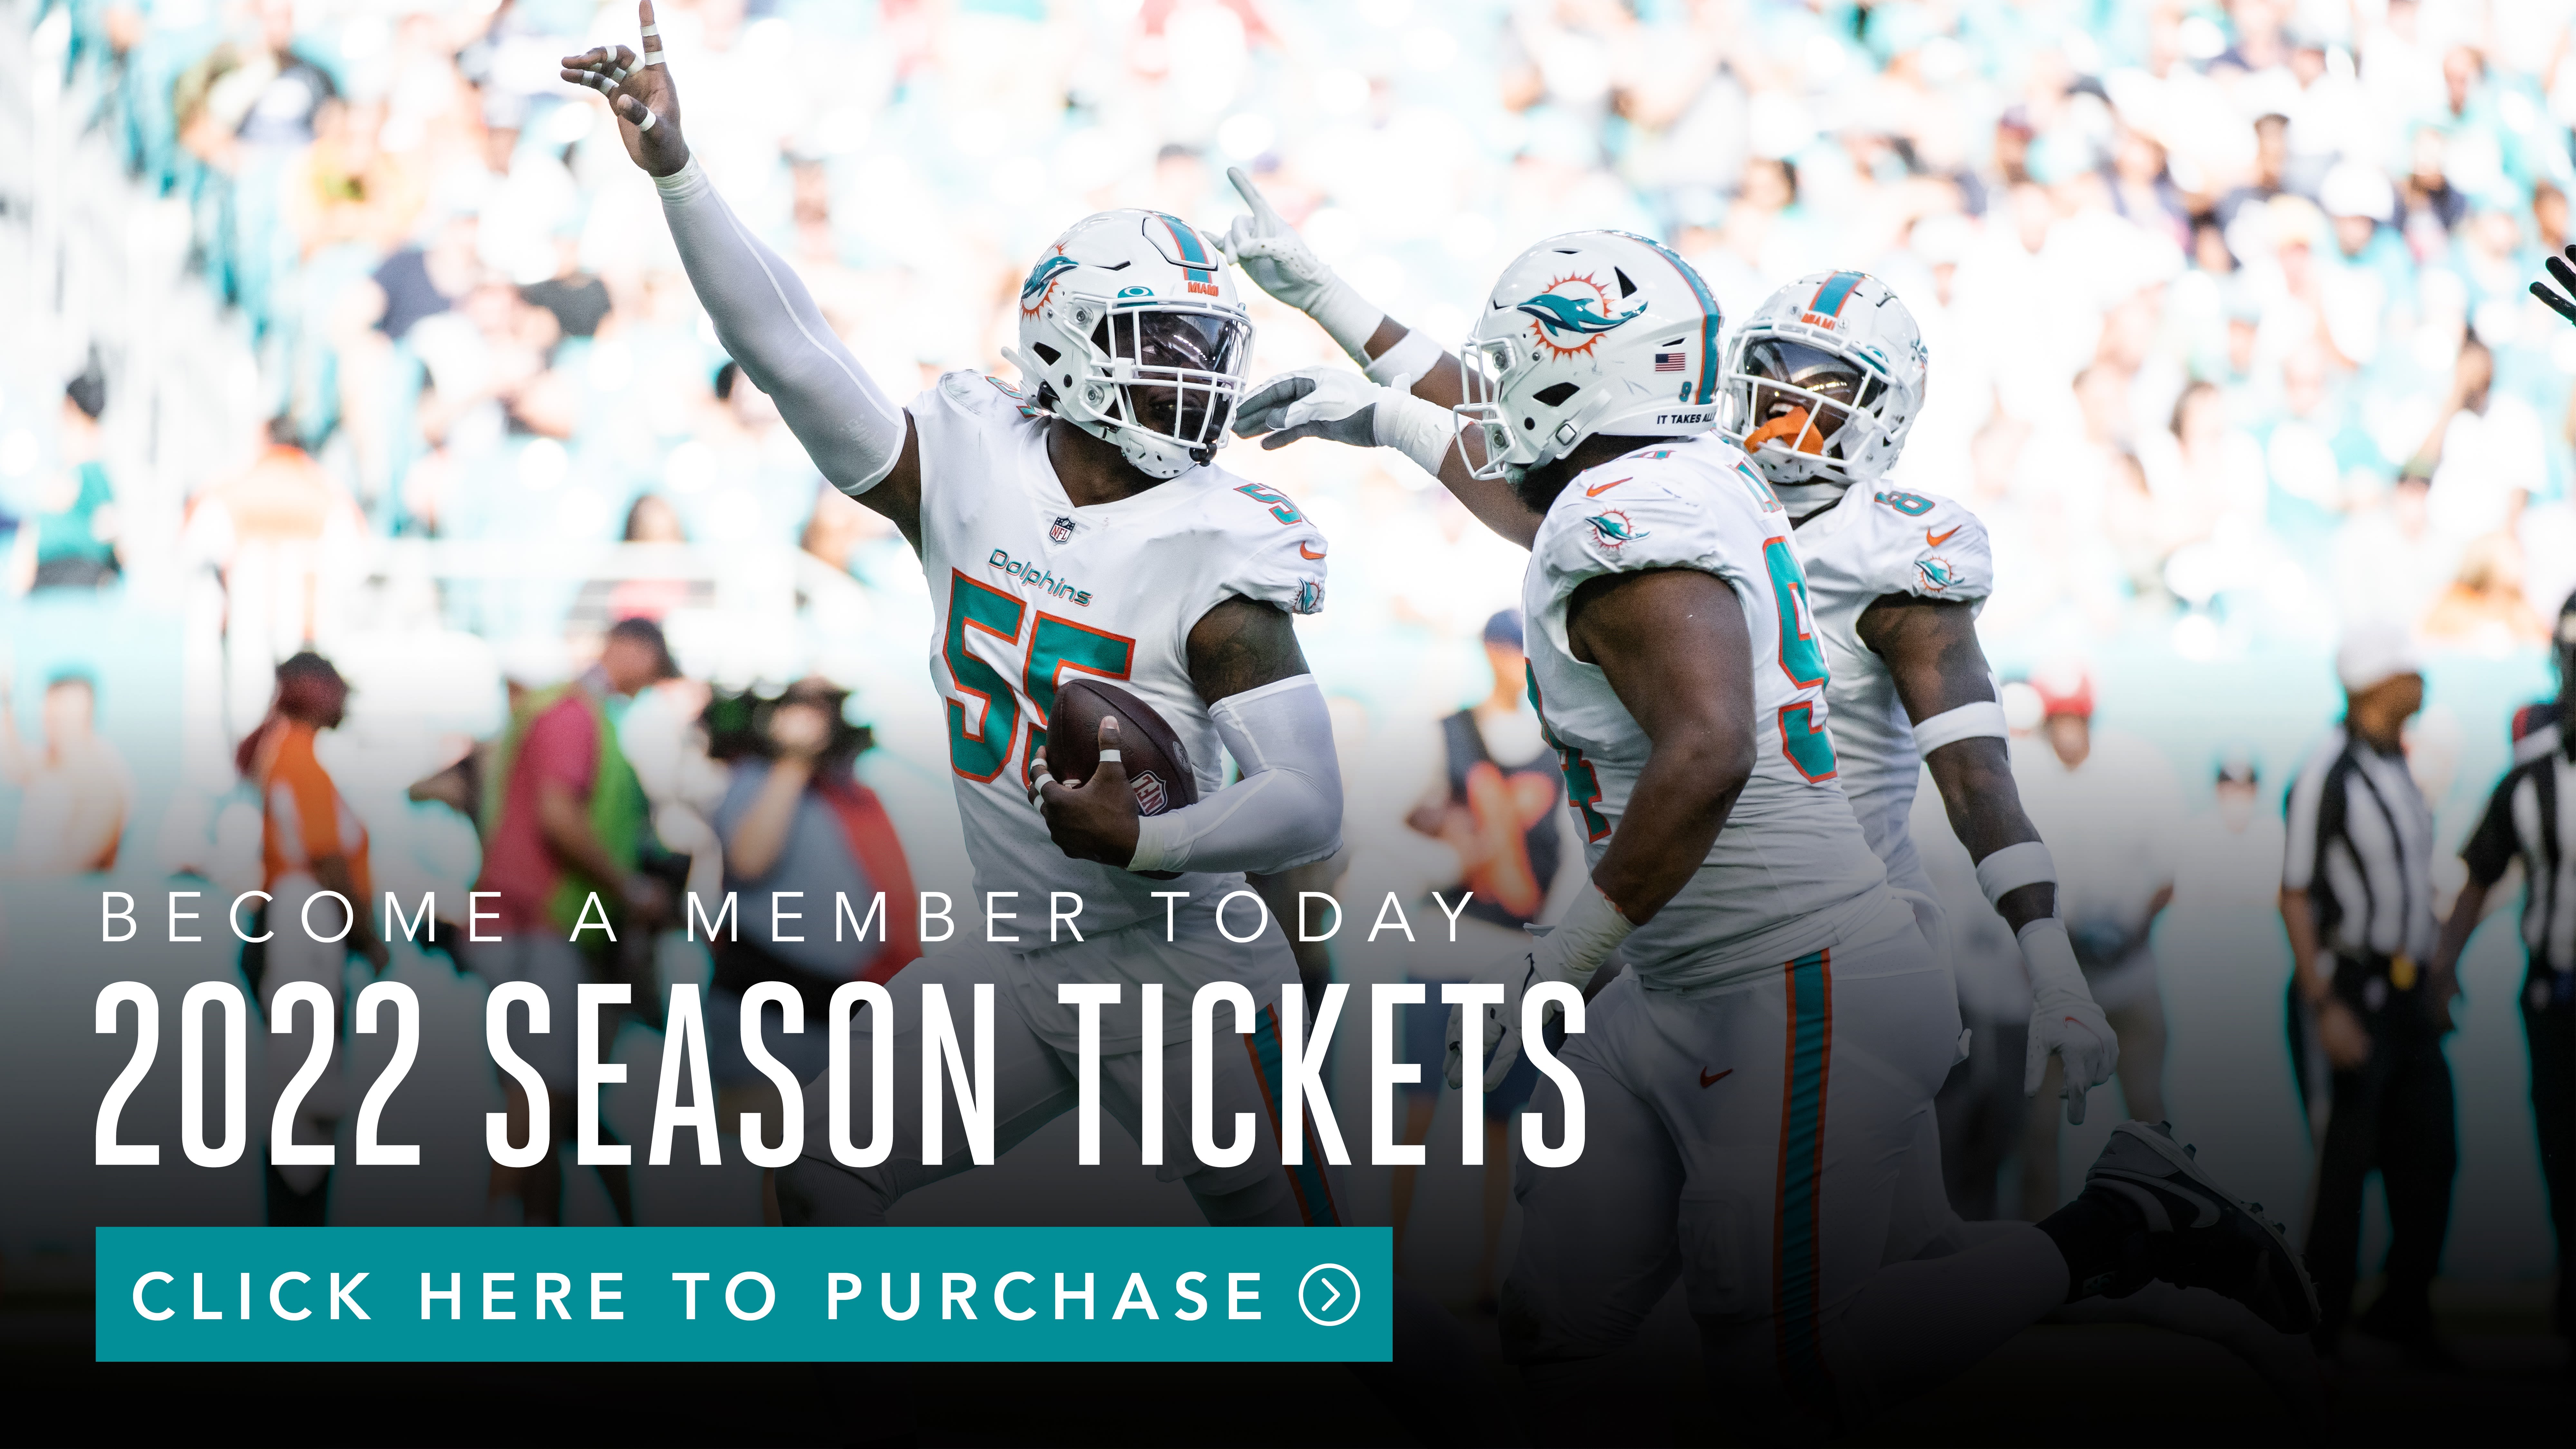 Miami Dolphins Home Schedule 2022 Dolphins Season Tickets Membership | Miami Dolphins - Dolphins.com